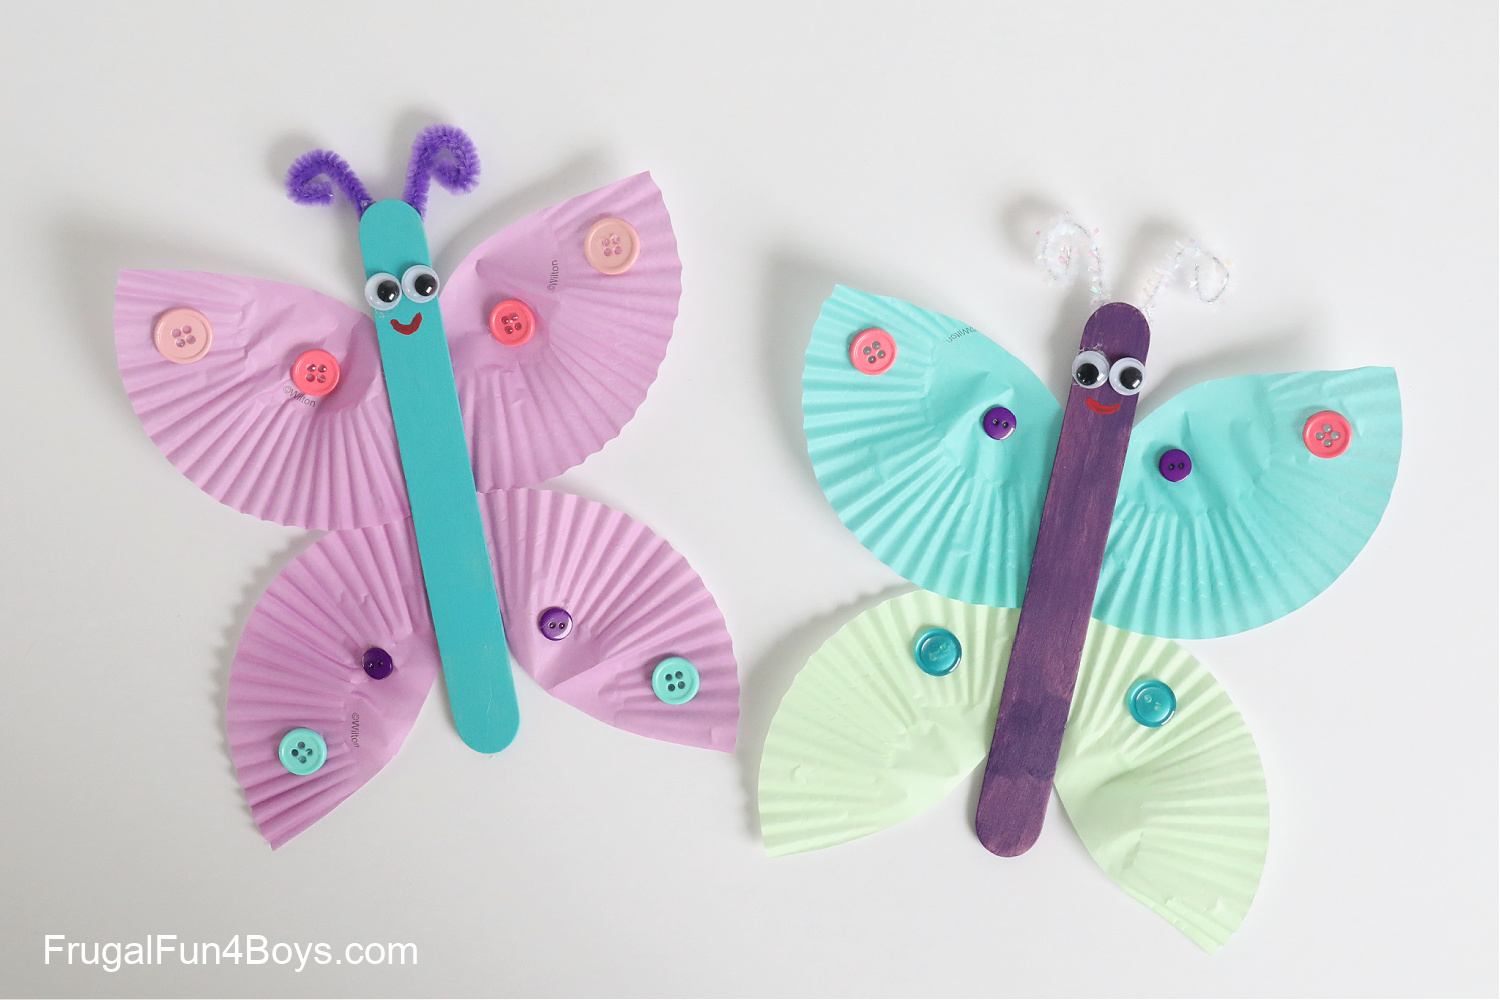 Cupcake Liner Butterfly Craft - Frugal Fun For Boys and Girls